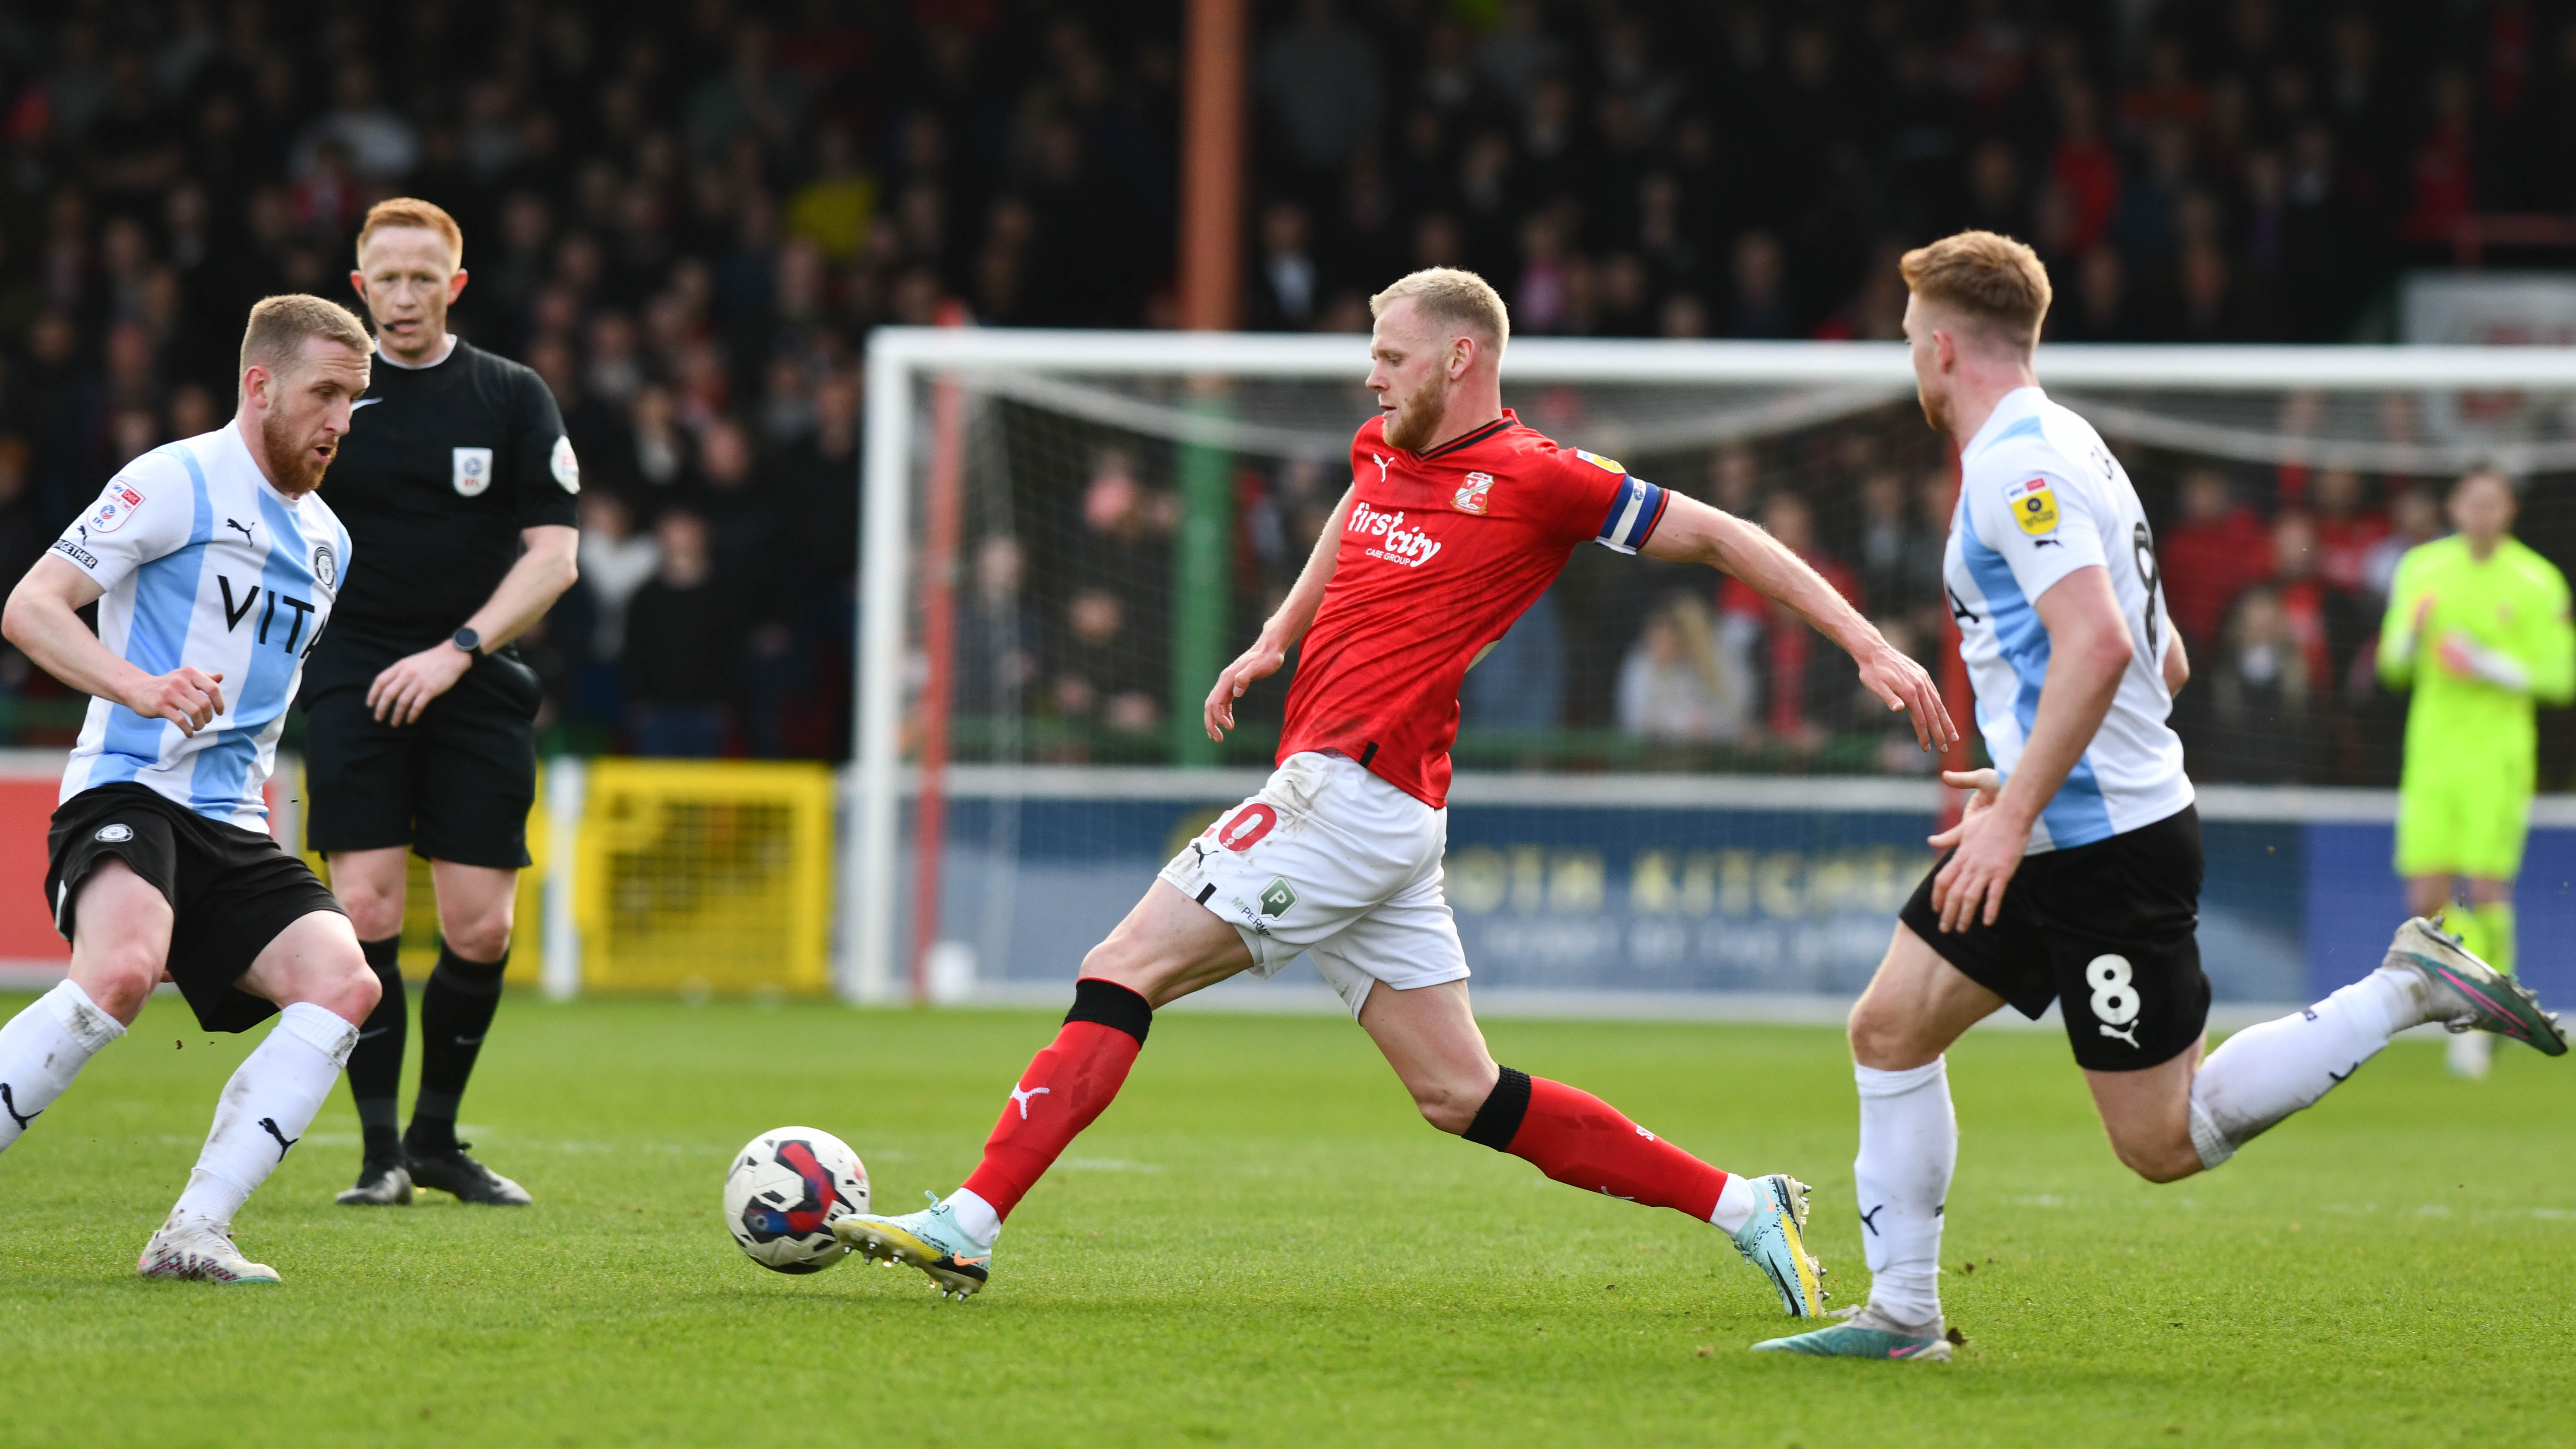 Frazer Blake-Tracy revealed the Swindon players had a bust up after defeat against Stockport